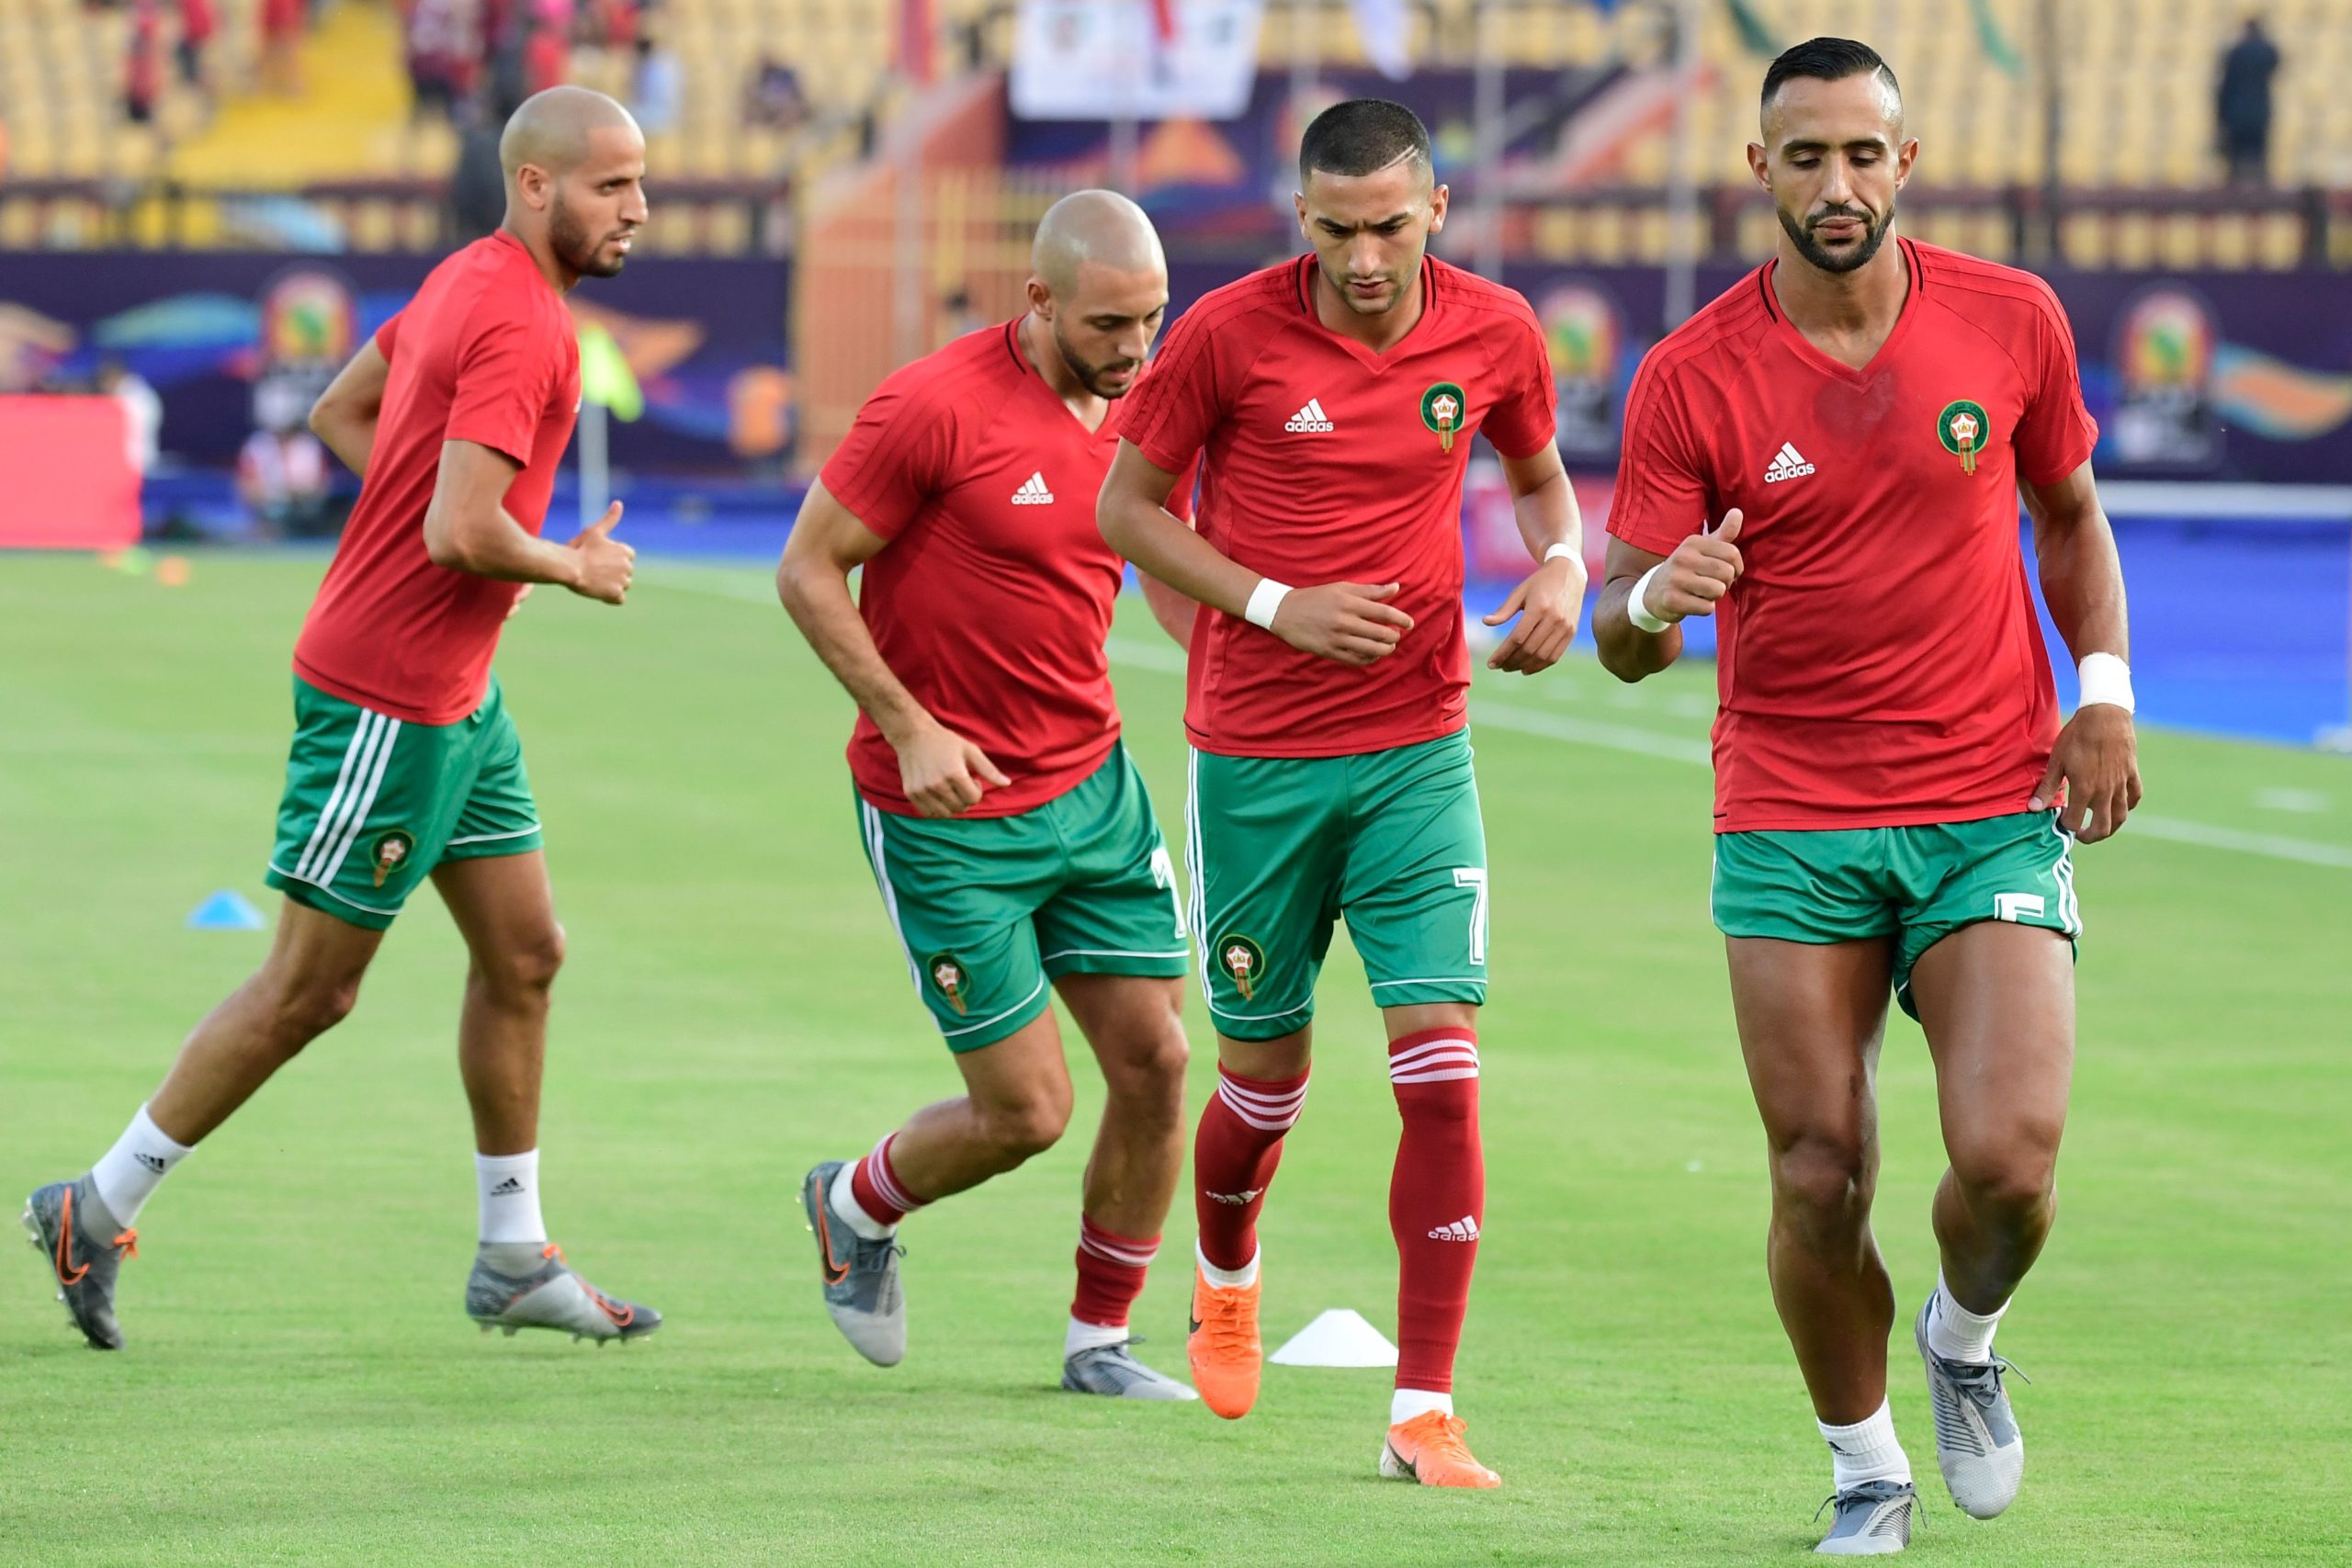 Morocco's defender Medhi Benatia (R) and Morocco's forward Hakim Ziyech (2nd-R) warm up ahead of the 2019 Africa Cup of Nations (CAN) Group D football match between Morocco and Ivory Coast at the Al Salam Stadium in the Egyptian capital Cairo on June 28, 2019. (Photo by JAVIER SORIANO / AFP) (Photo credit should read JAVIER SORIANO/AFP via Getty Images)